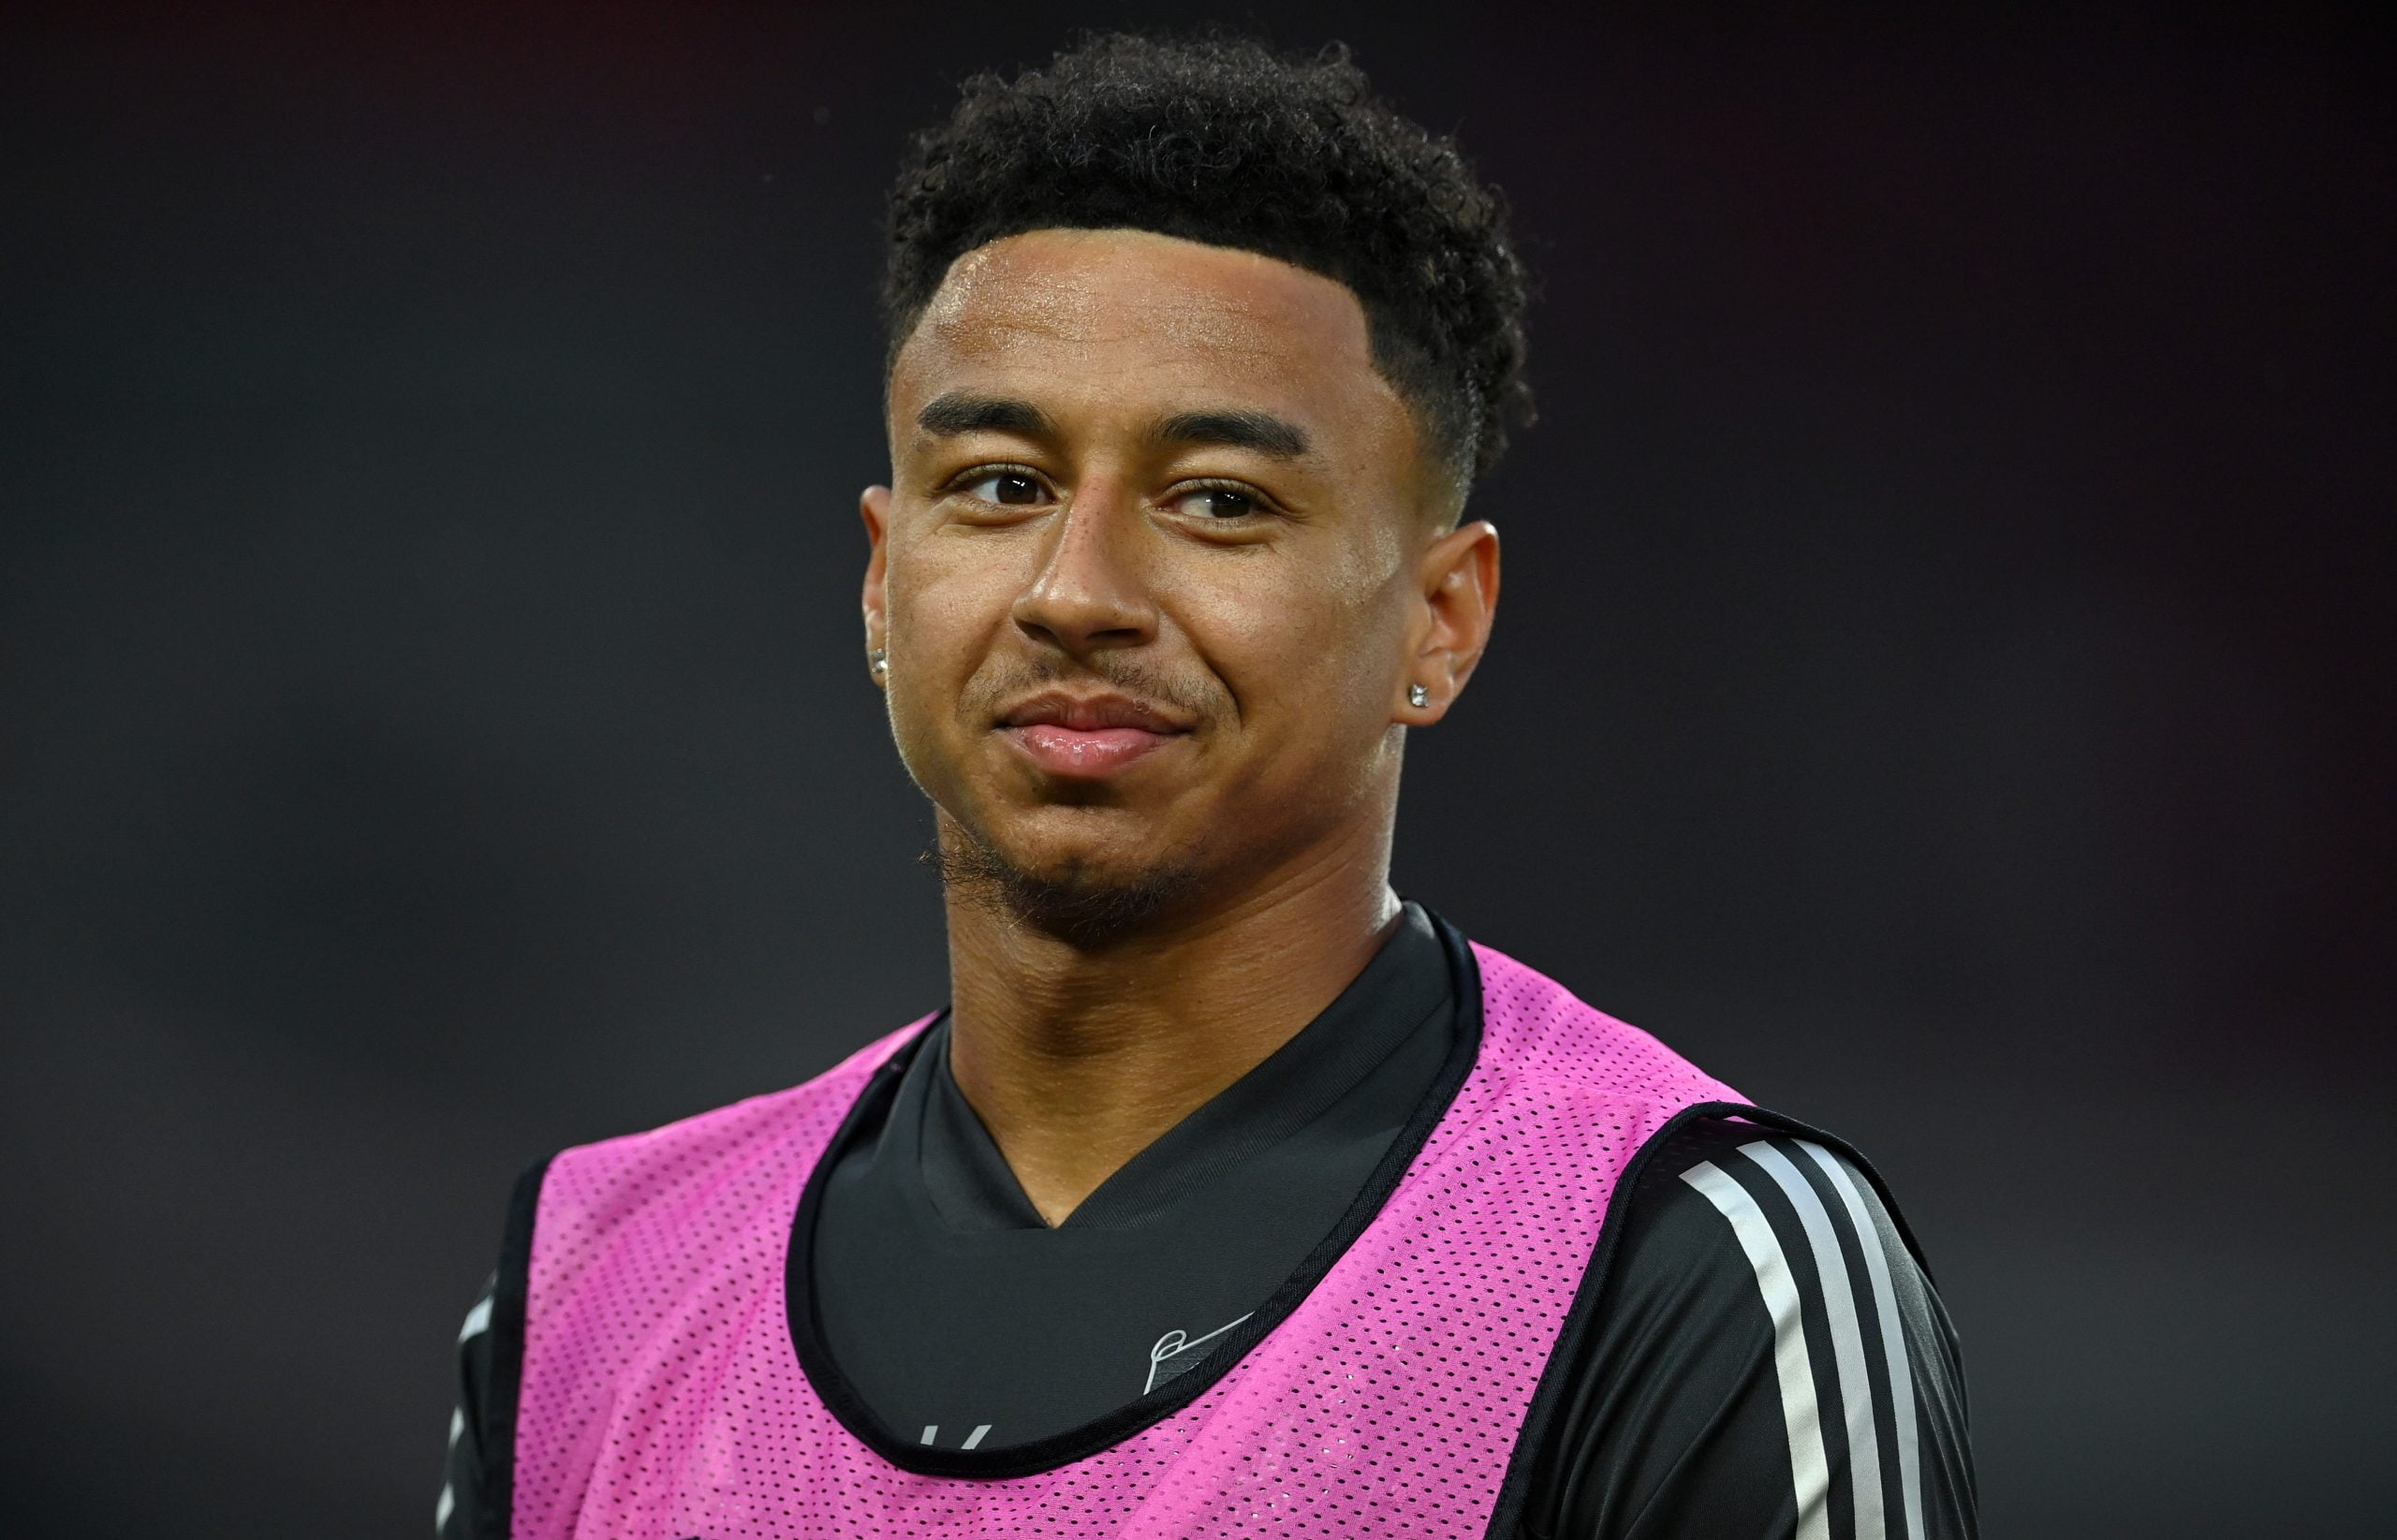 West Ham set to compete with Leicester to sign Lingard who is seen in the picture